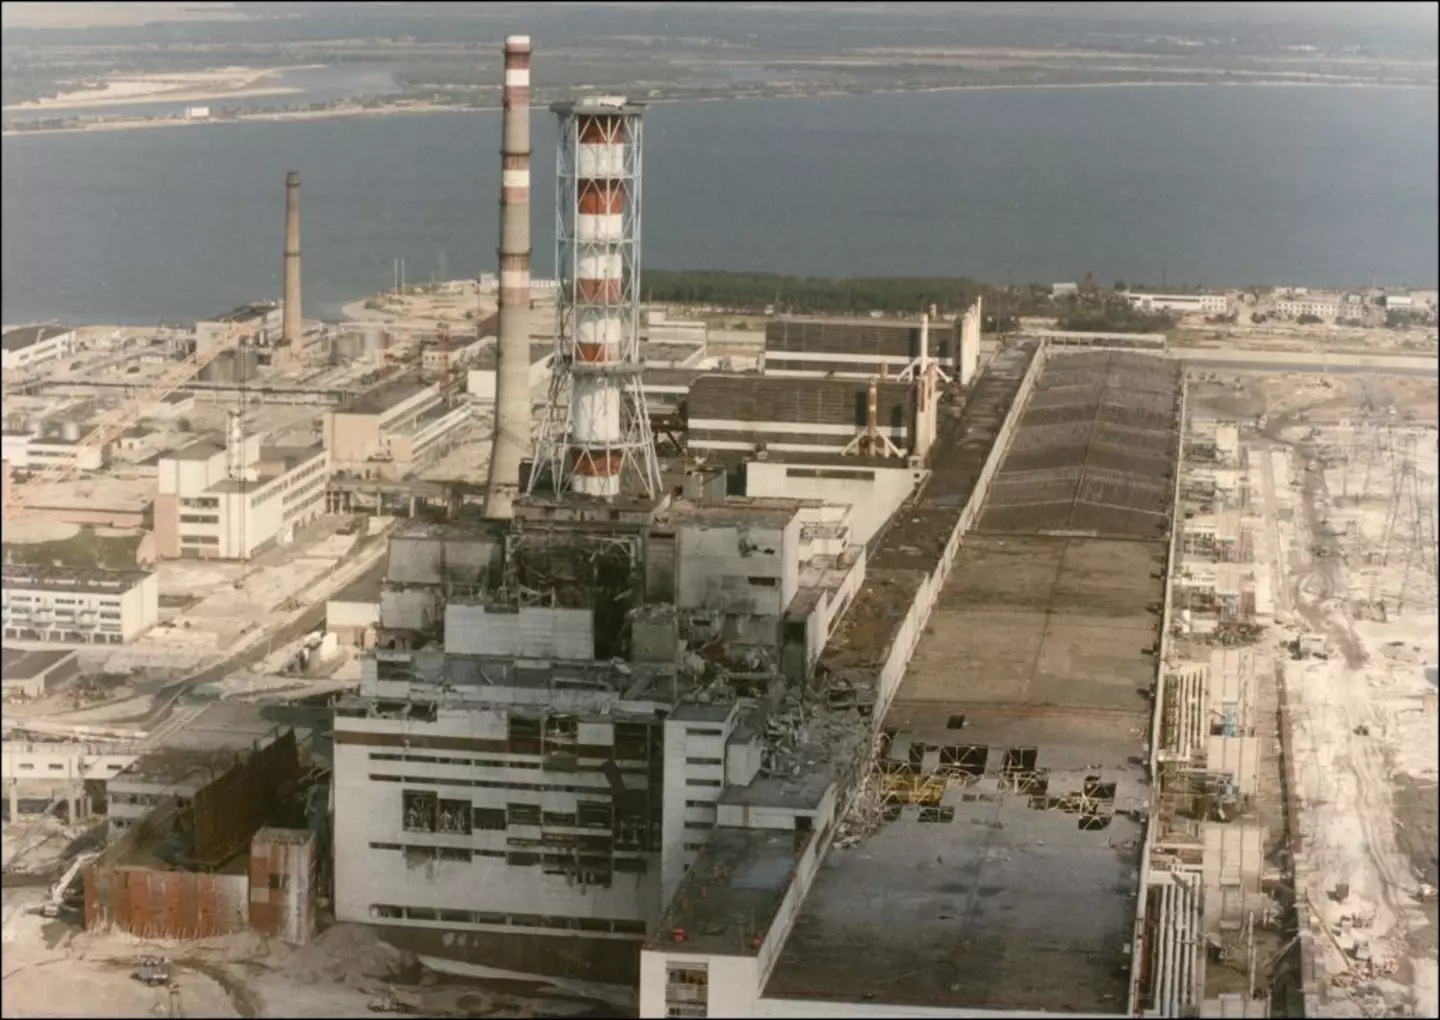 The Chernobyl disaster in 1986 is known as one of ‘the world’s worst nuclear accidents’.